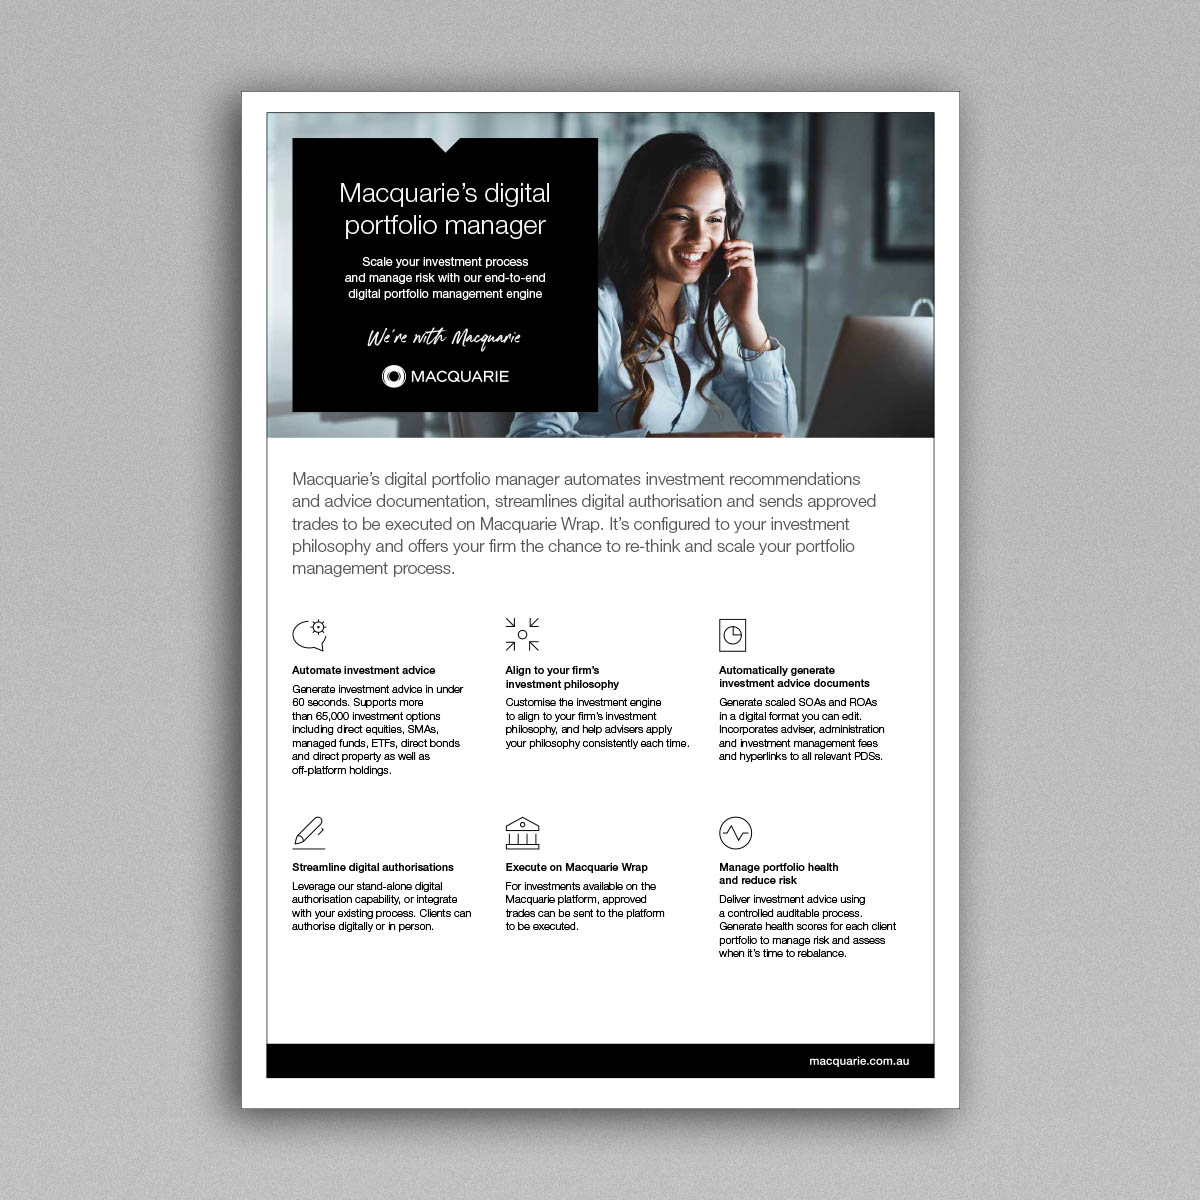 Image of front cover of Digital Portfolio Manager flyer on a grey background